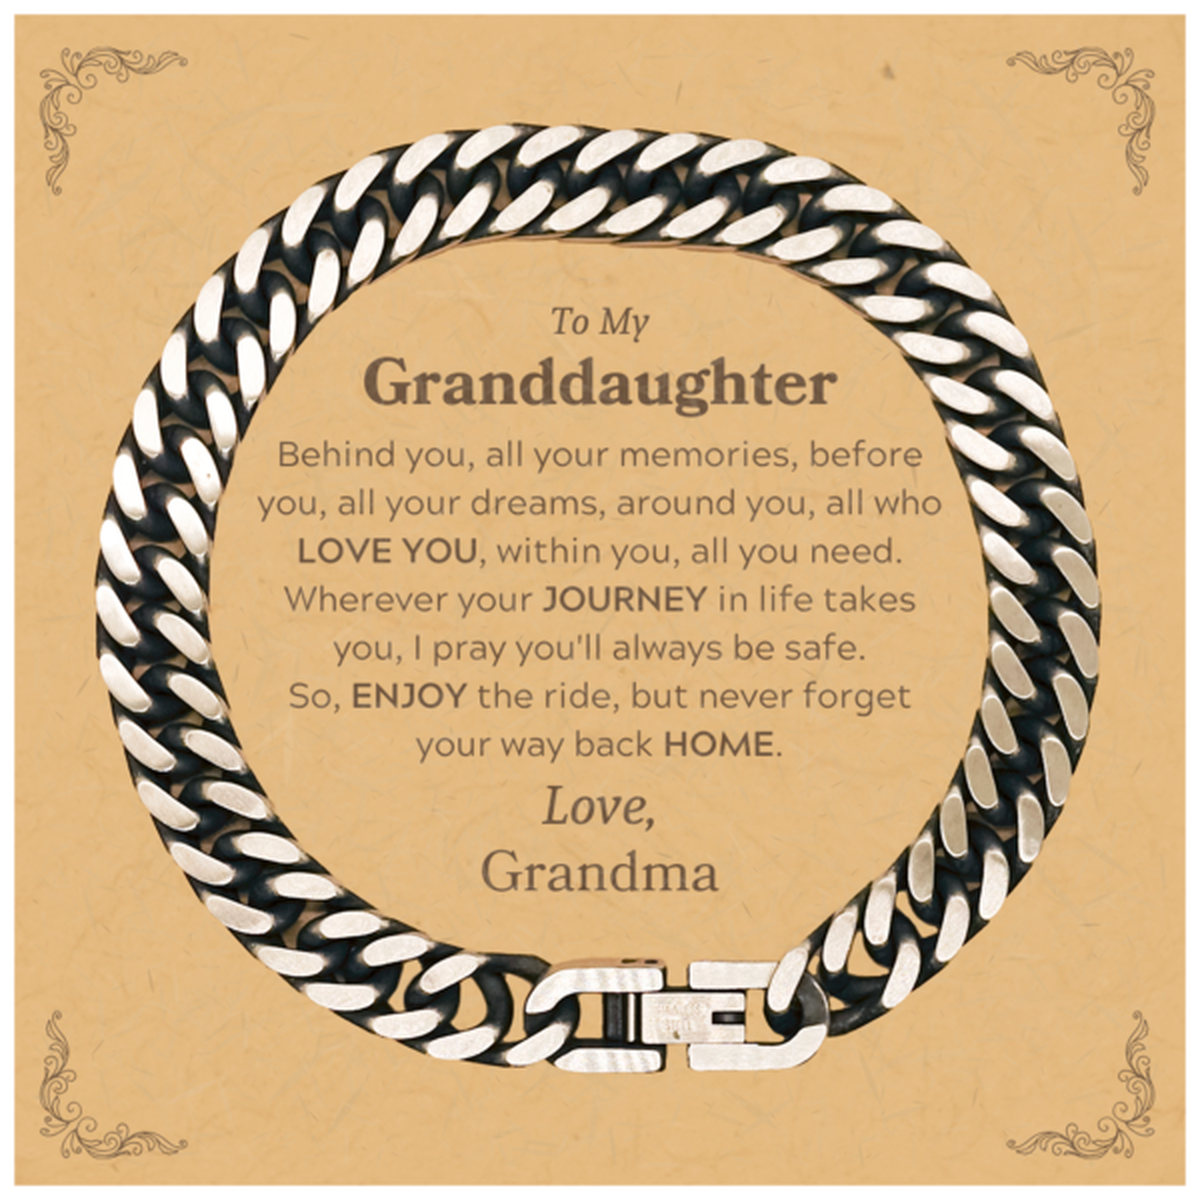 To My Granddaughter Graduation Gifts from Grandma, Granddaughter Cuban Link Chain Bracelet Christmas Birthday Gifts for Granddaughter Behind you, all your memories, before you, all your dreams. Love, Grandma